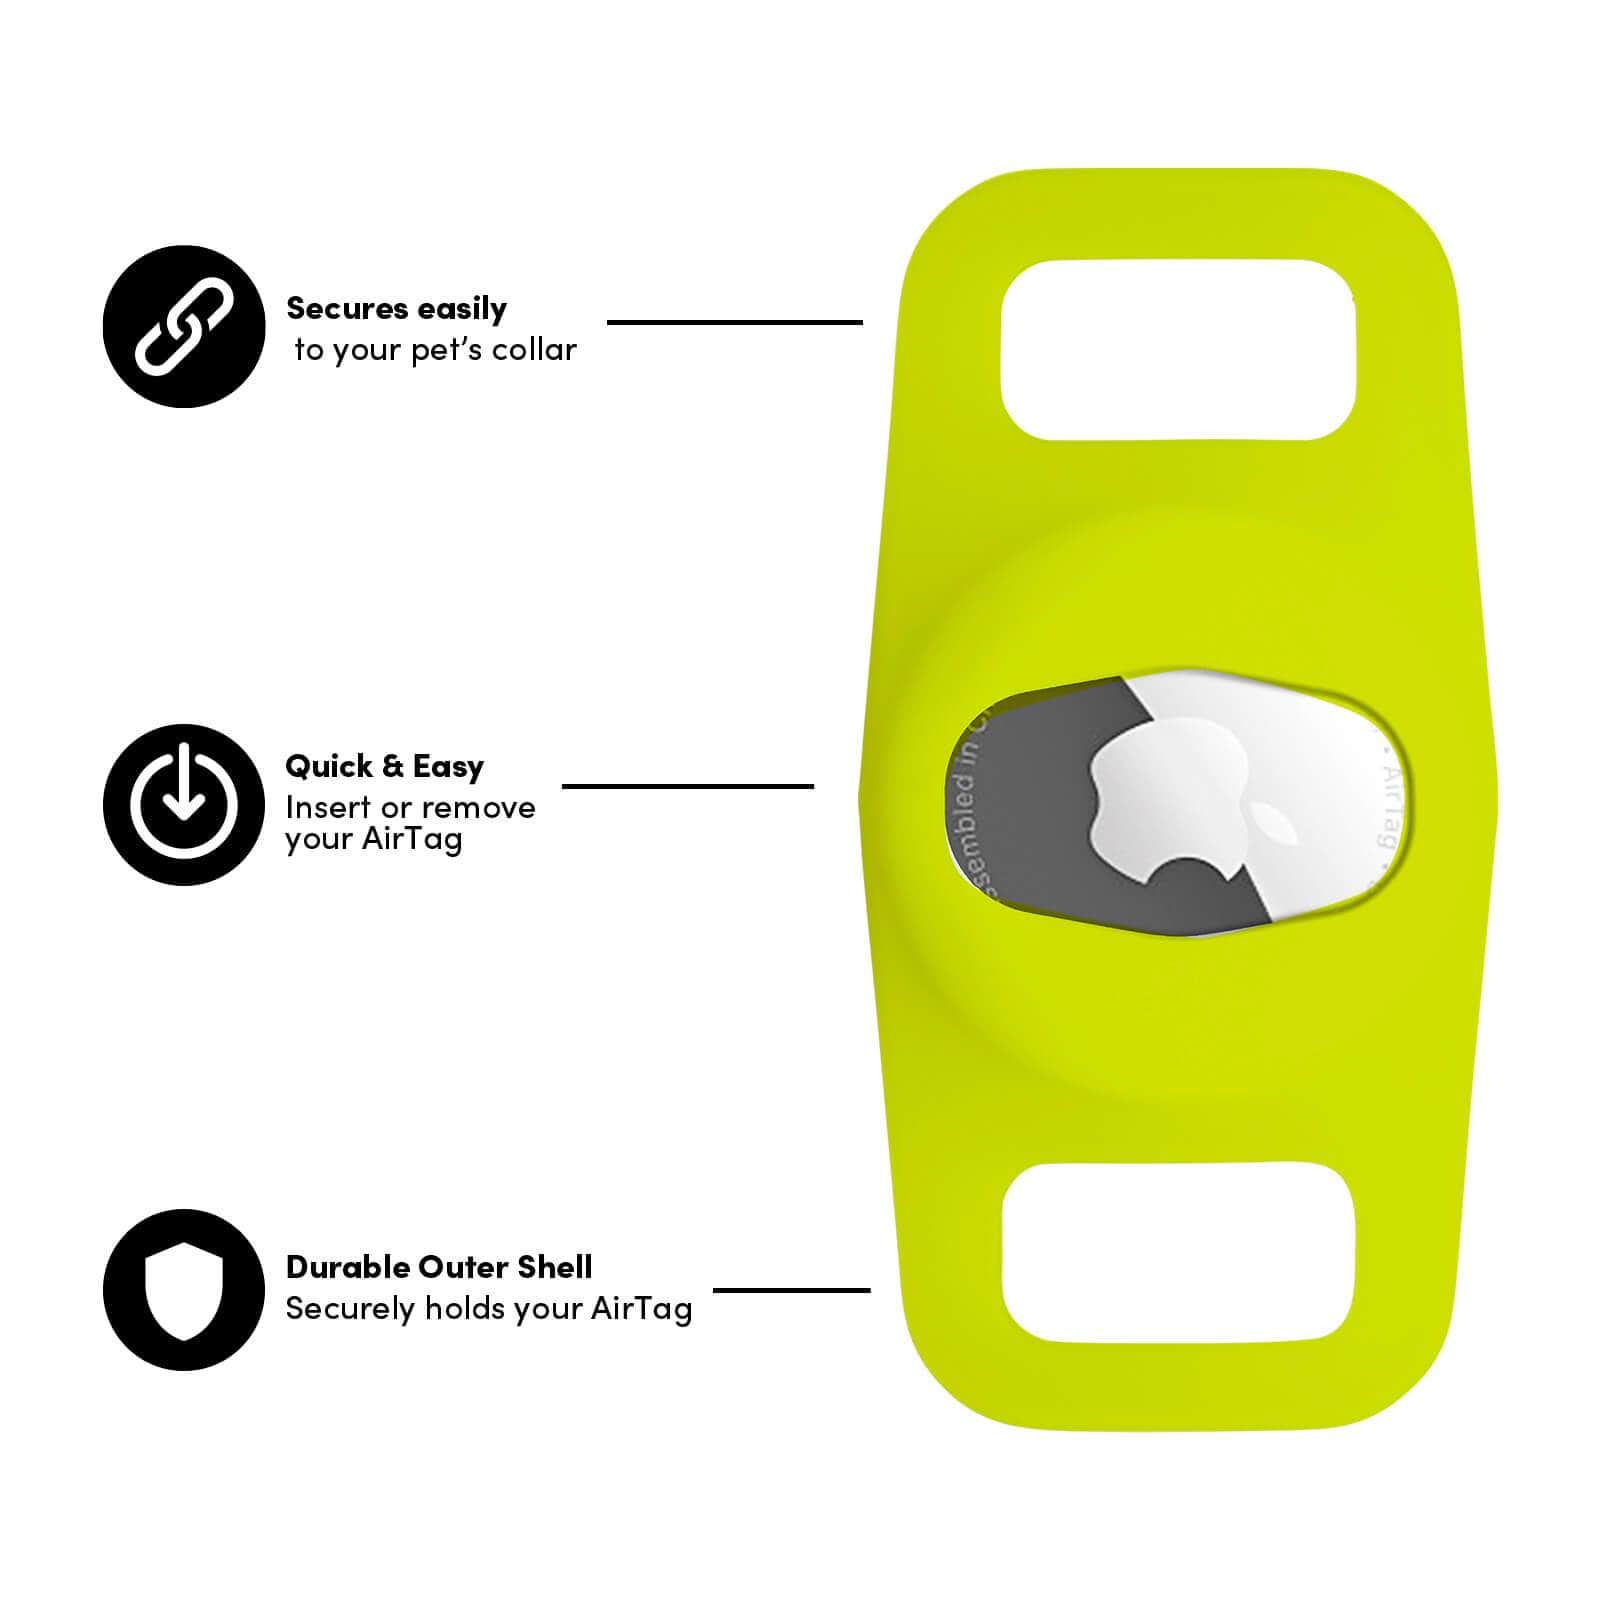 Secure's easily to your dog's collar, quick and easy insert or remove your AirTag, durable outer shell holds your AirTag. color::Lime Green